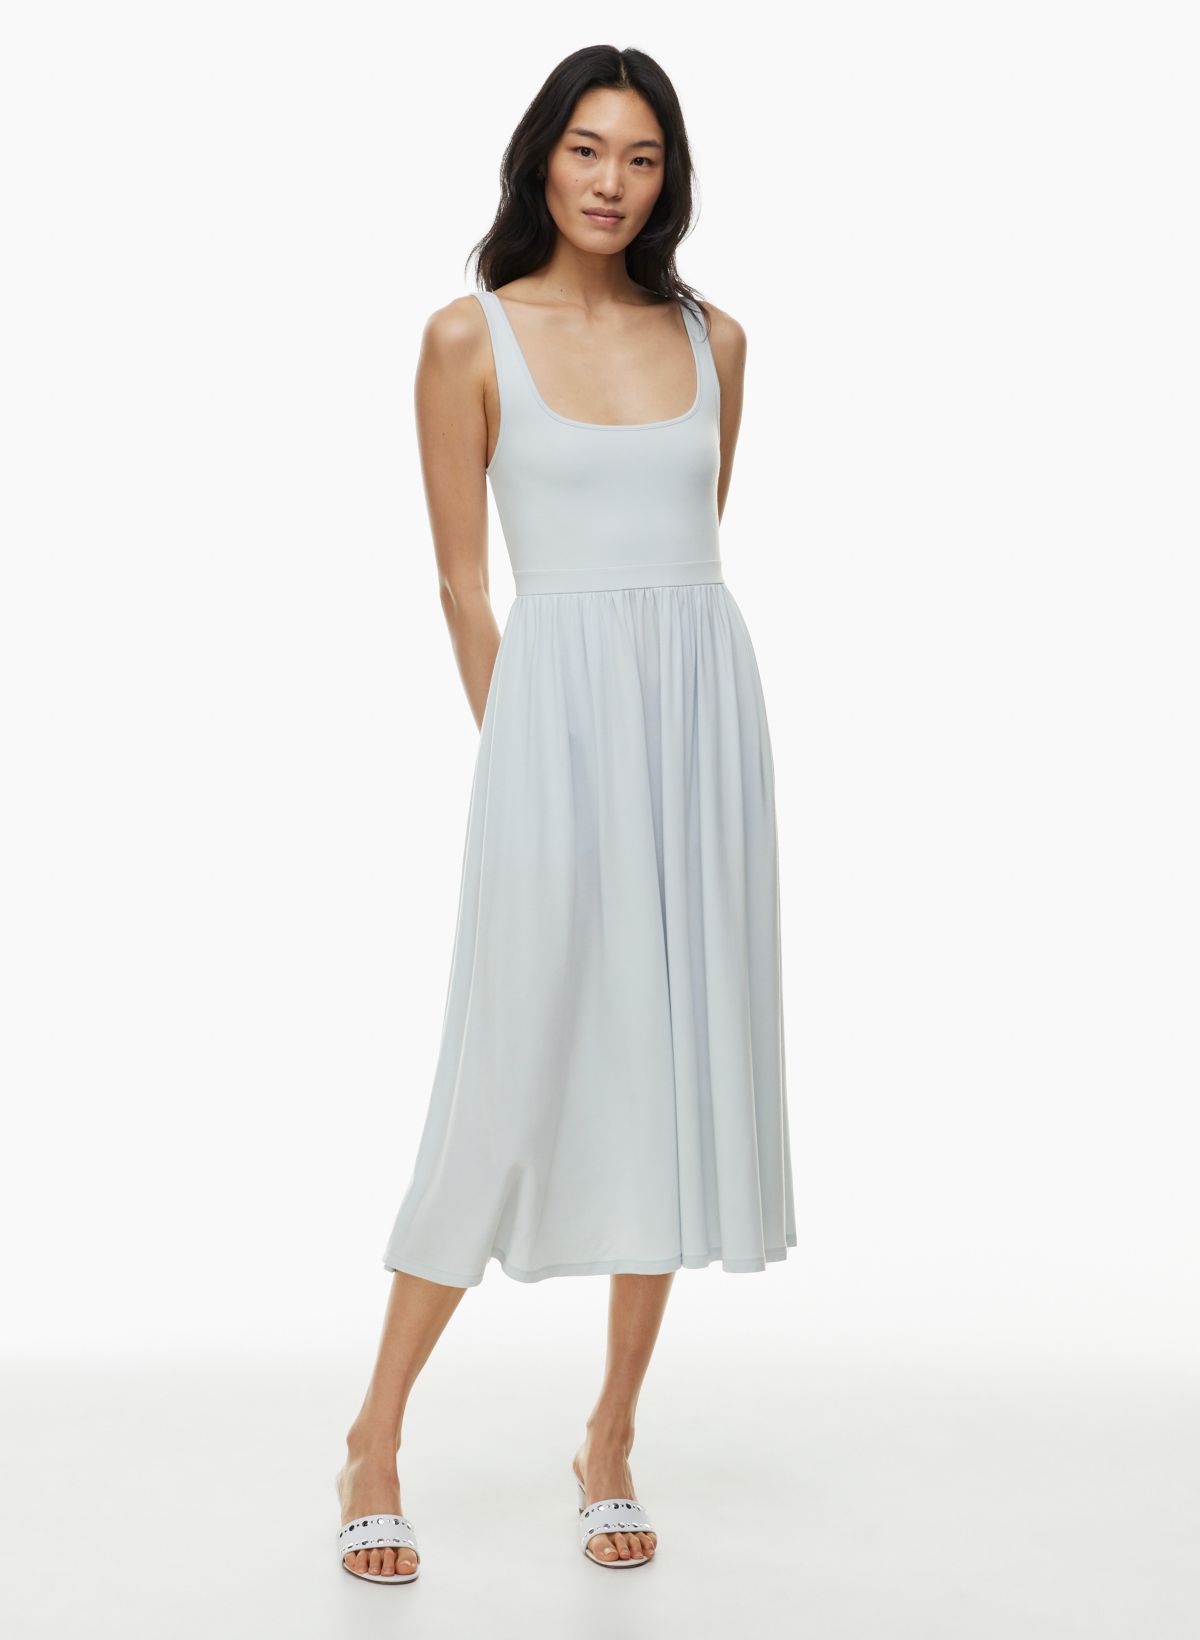 Wedding Guest Dresses that You'll Actually Want to Wear - Loverly Grey